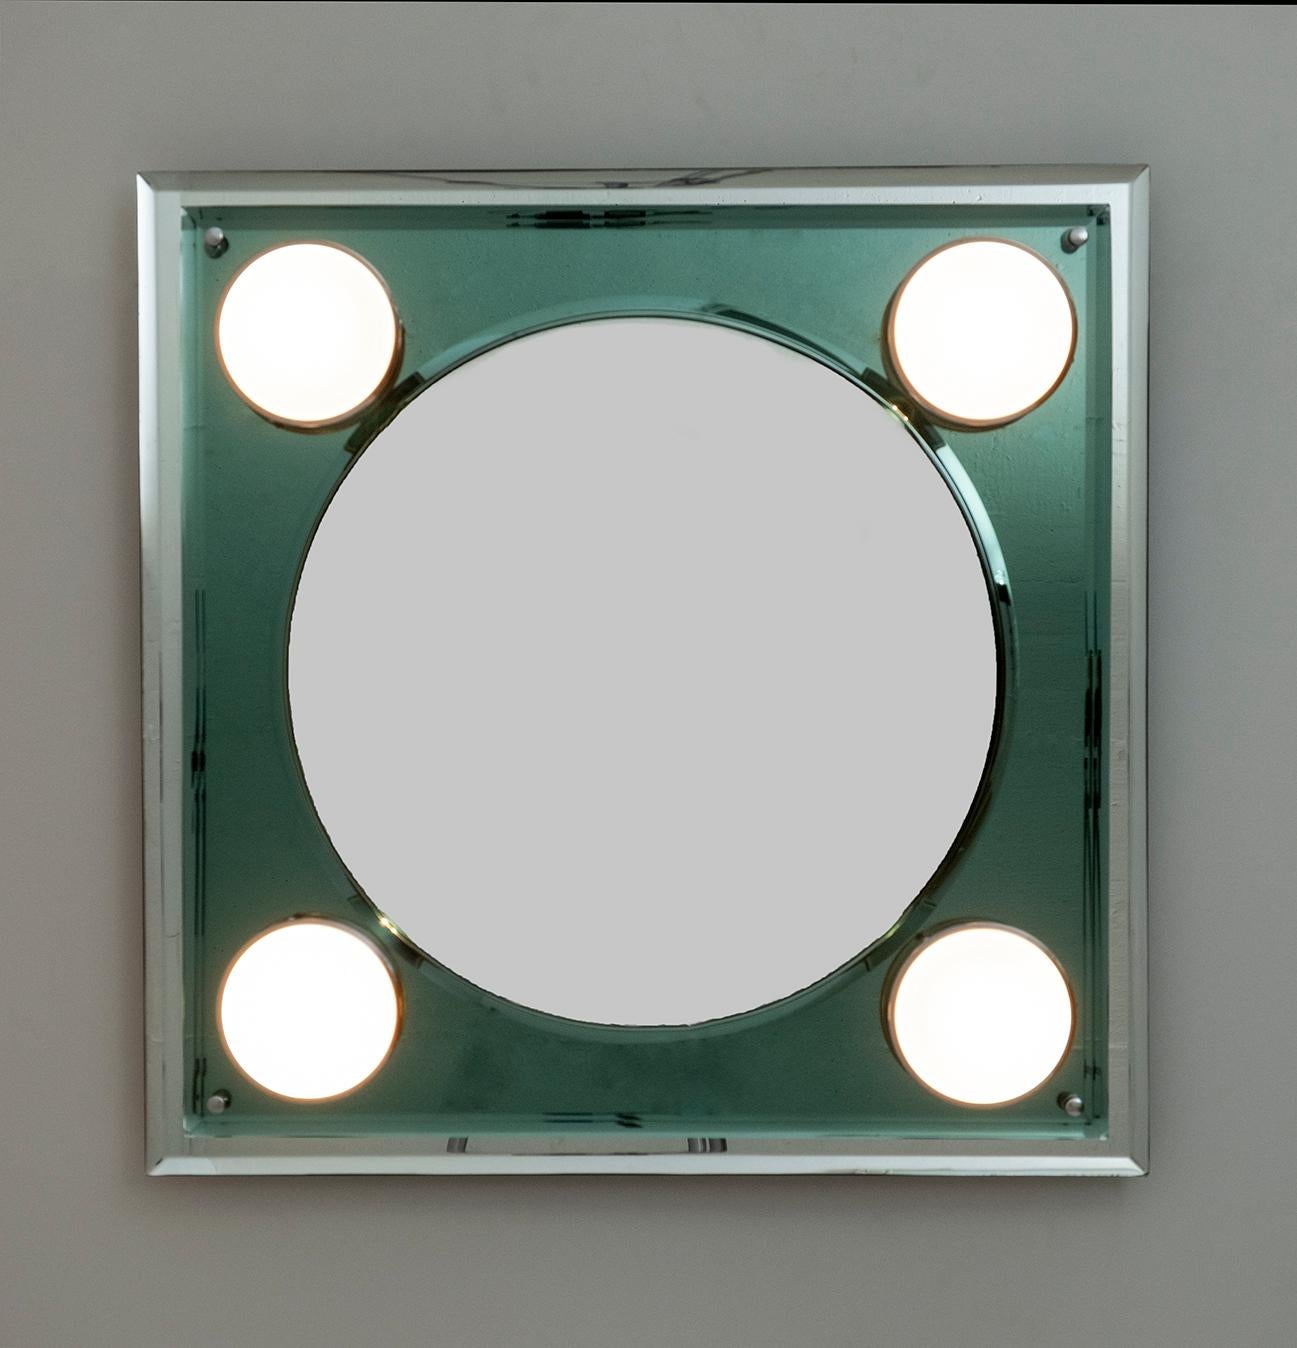 This bathroom mirror created by the famous Italian company Lupi was made in the 1970s.
It is square in shape, composed of a mirror on a metal support and placed above a thick green cut crystal, cut in the center in a circular shape, four lights